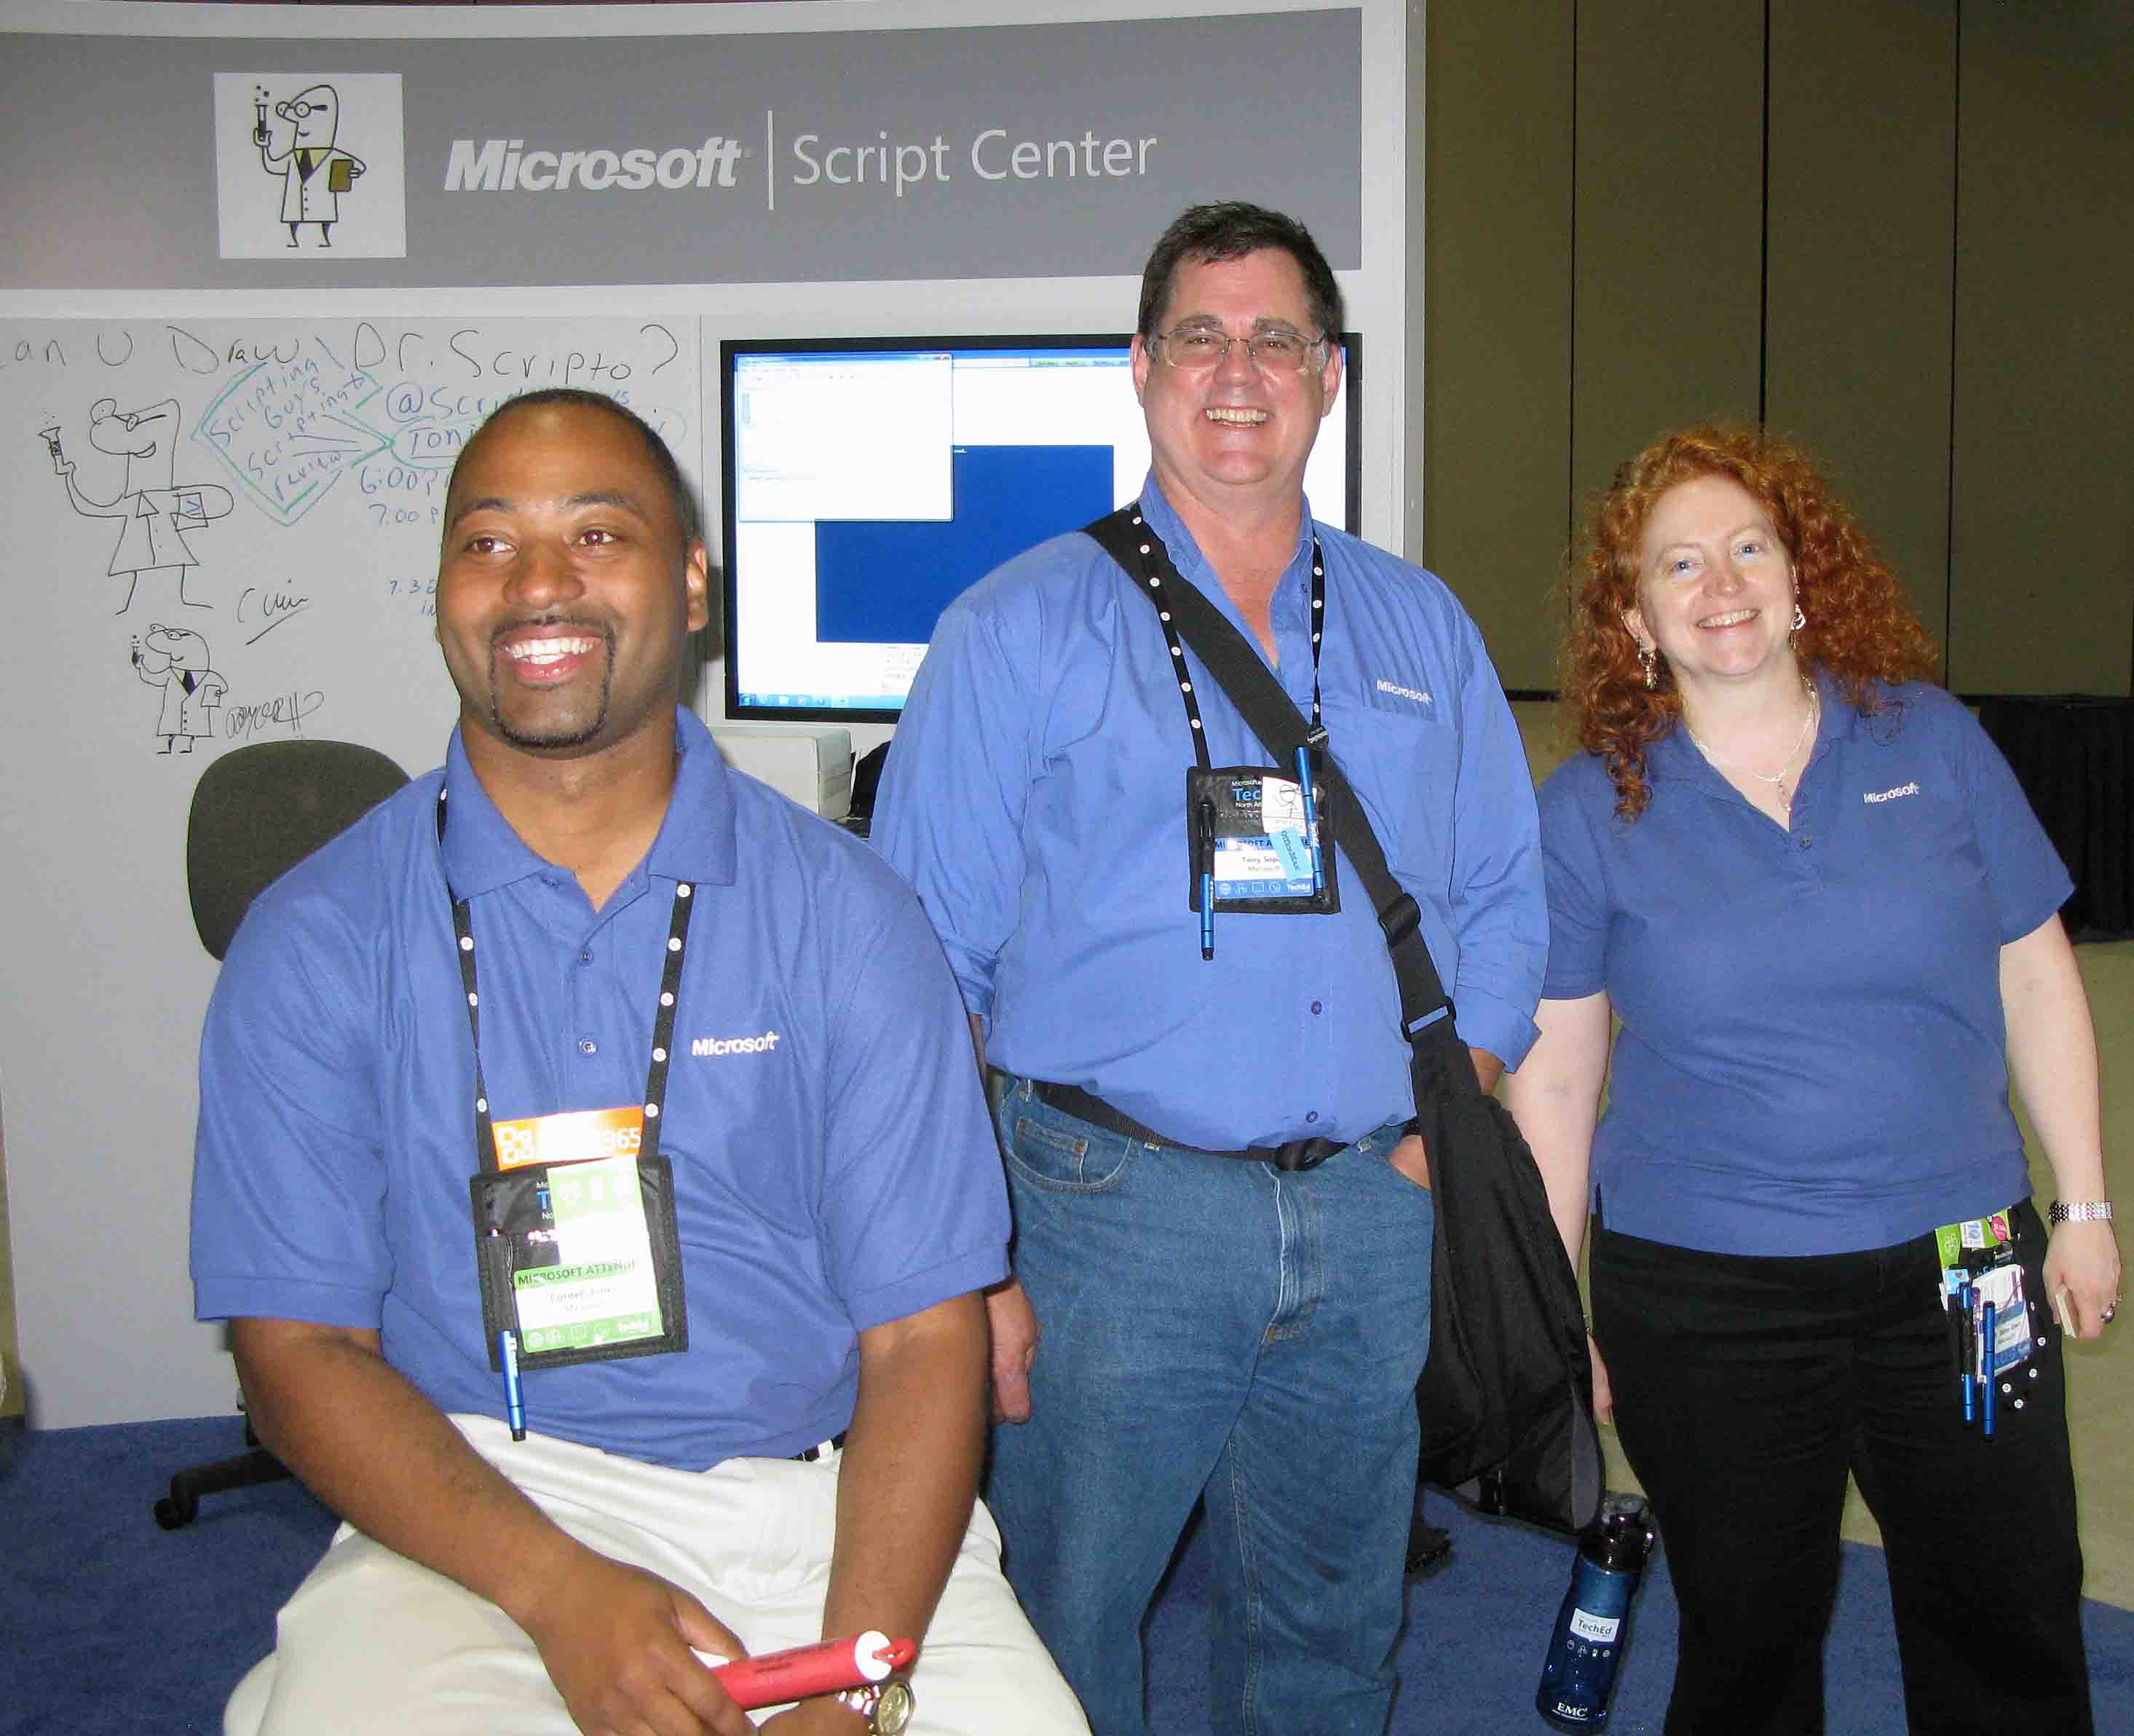 Photo from TechEd